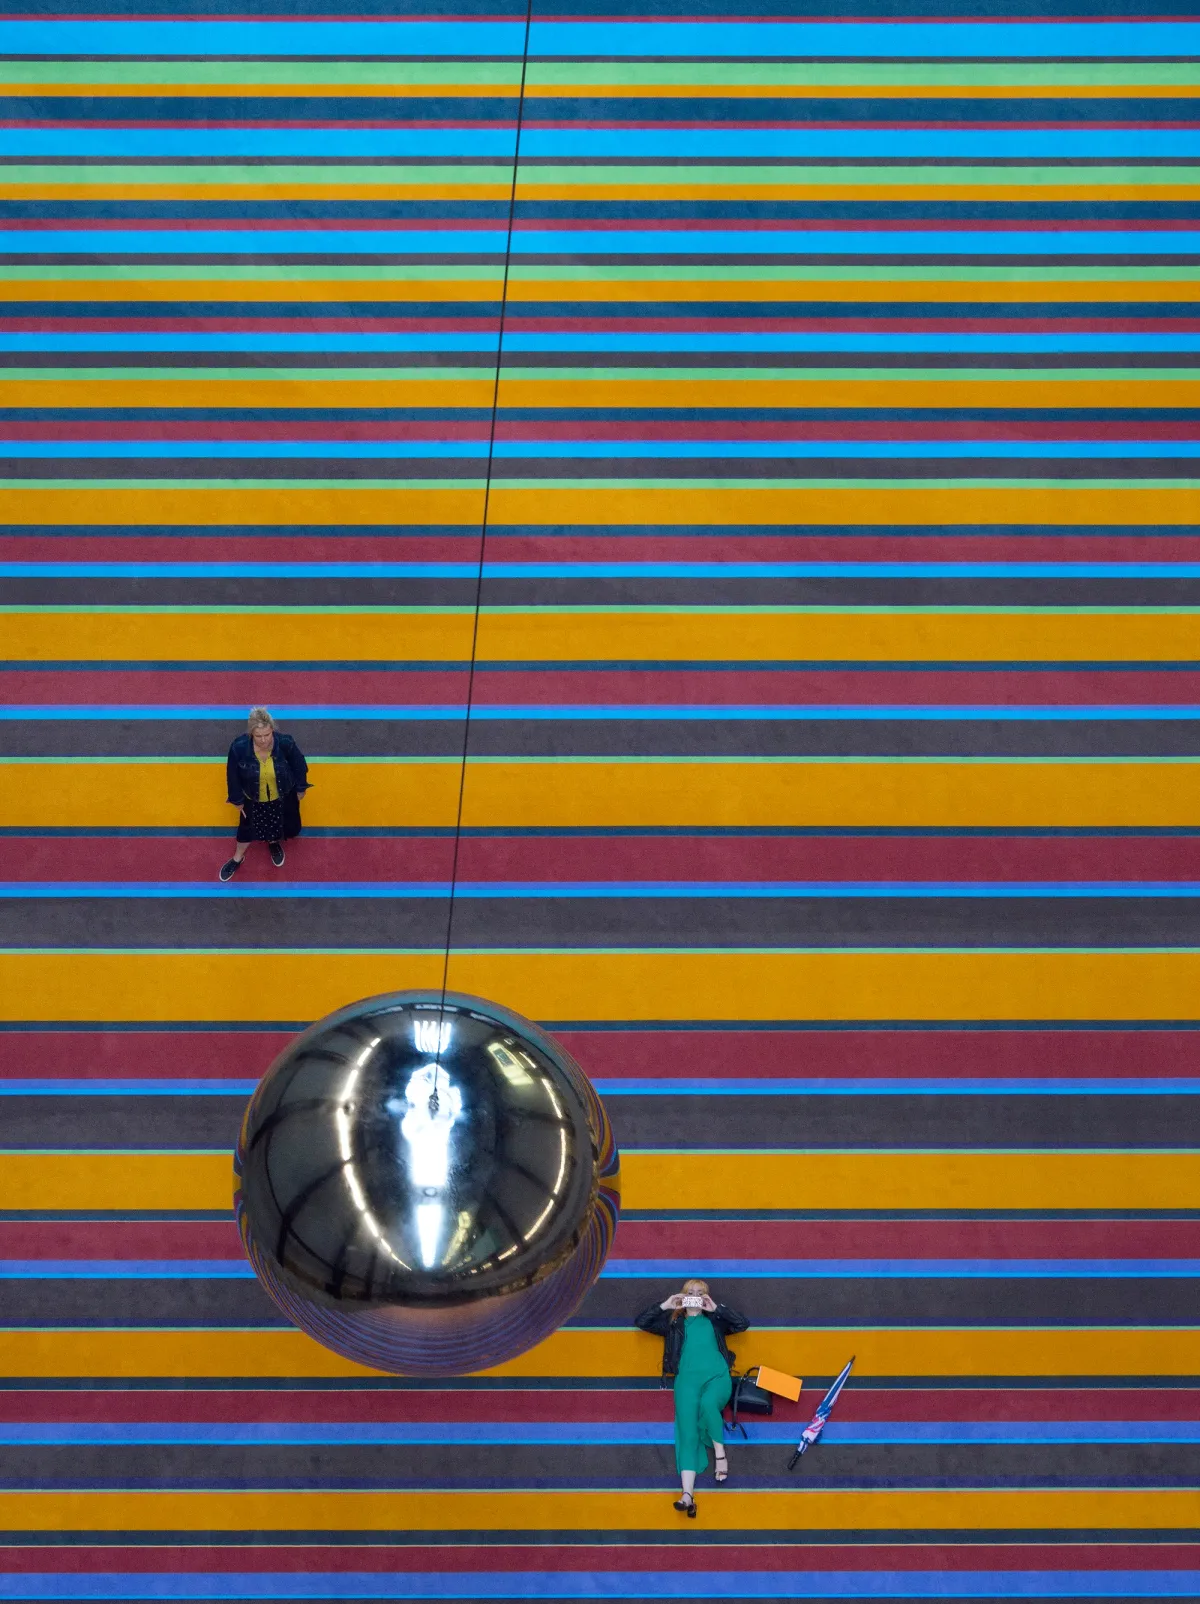 An overhead view of a person standing and looking up at a shiny sphere attached to a multicolored line on the floor, while another person lays nearby holding cake.